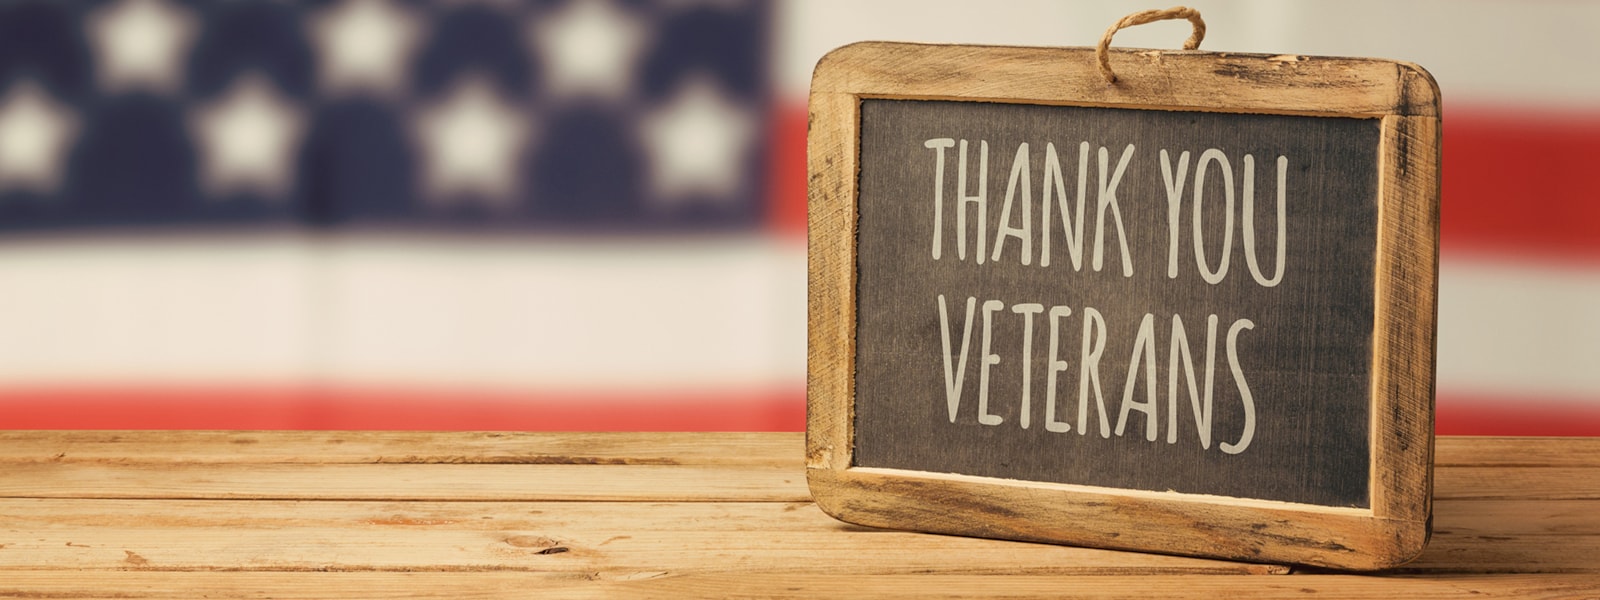 A chalk board sign saying Thank You Veterans sitting on a wood table with flag in the background.